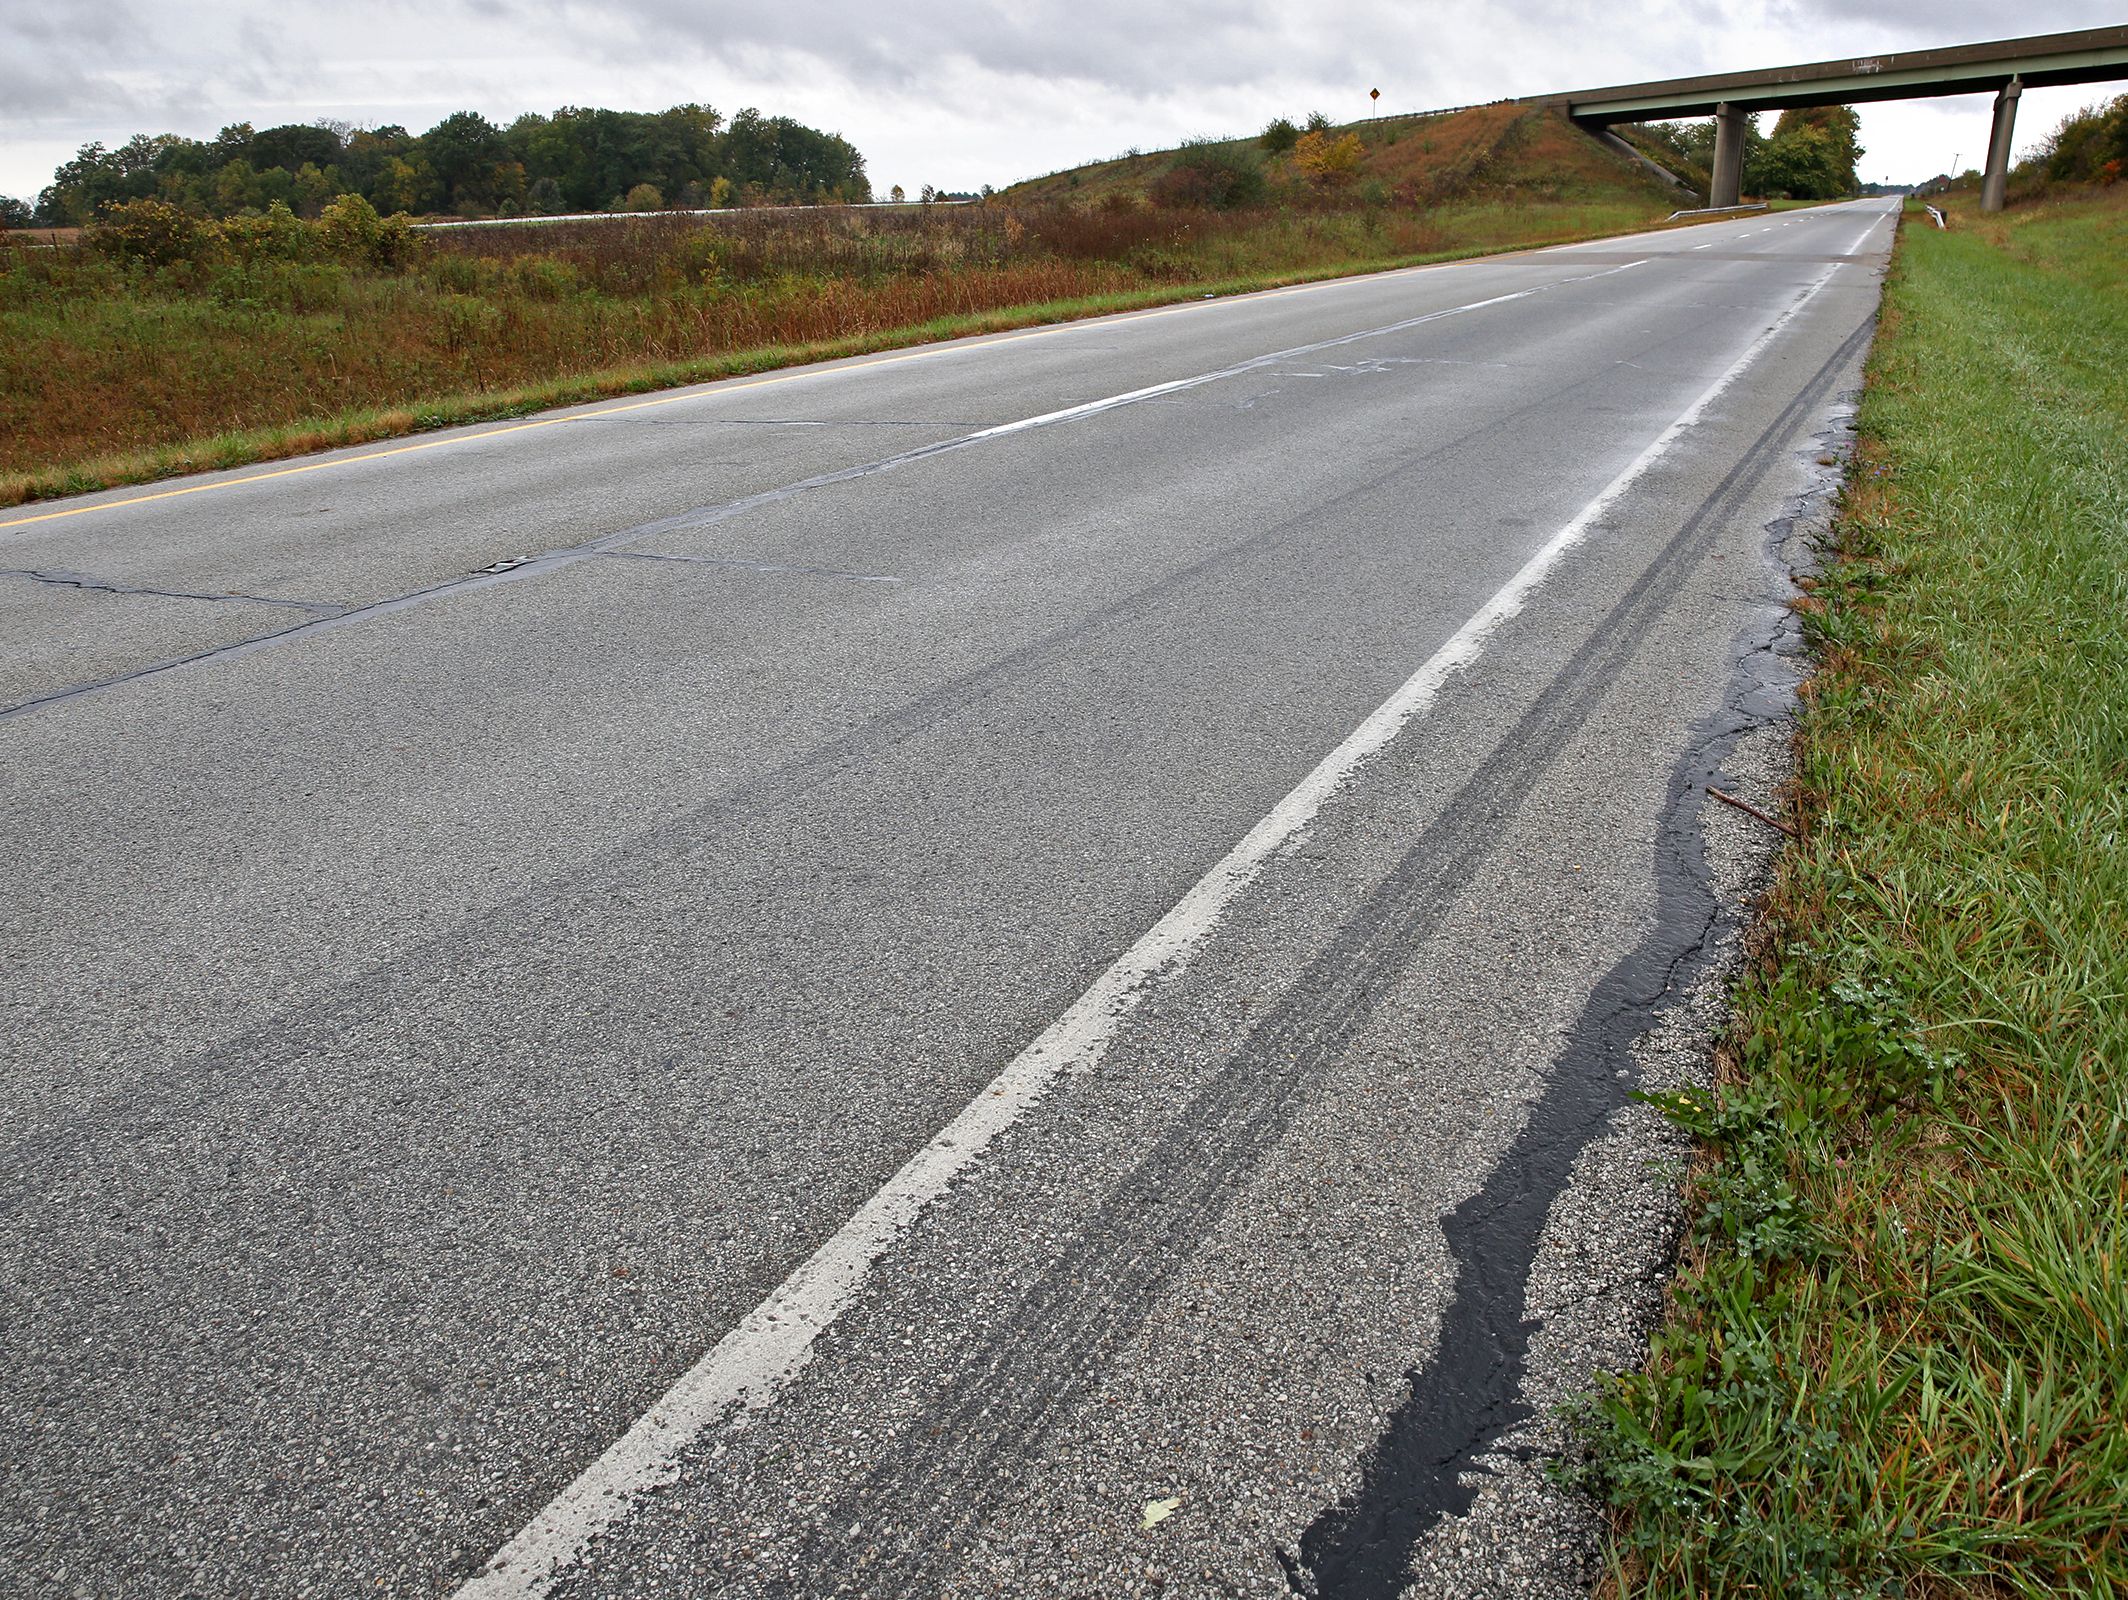 Donita Walters, who was hospitalized over the summer before going on a coast-to-coast bike ride, is currently working on her recovery with goals in sight. Meanwhile, the tire marks from the car that hit her remain on the road where Walters was hit.